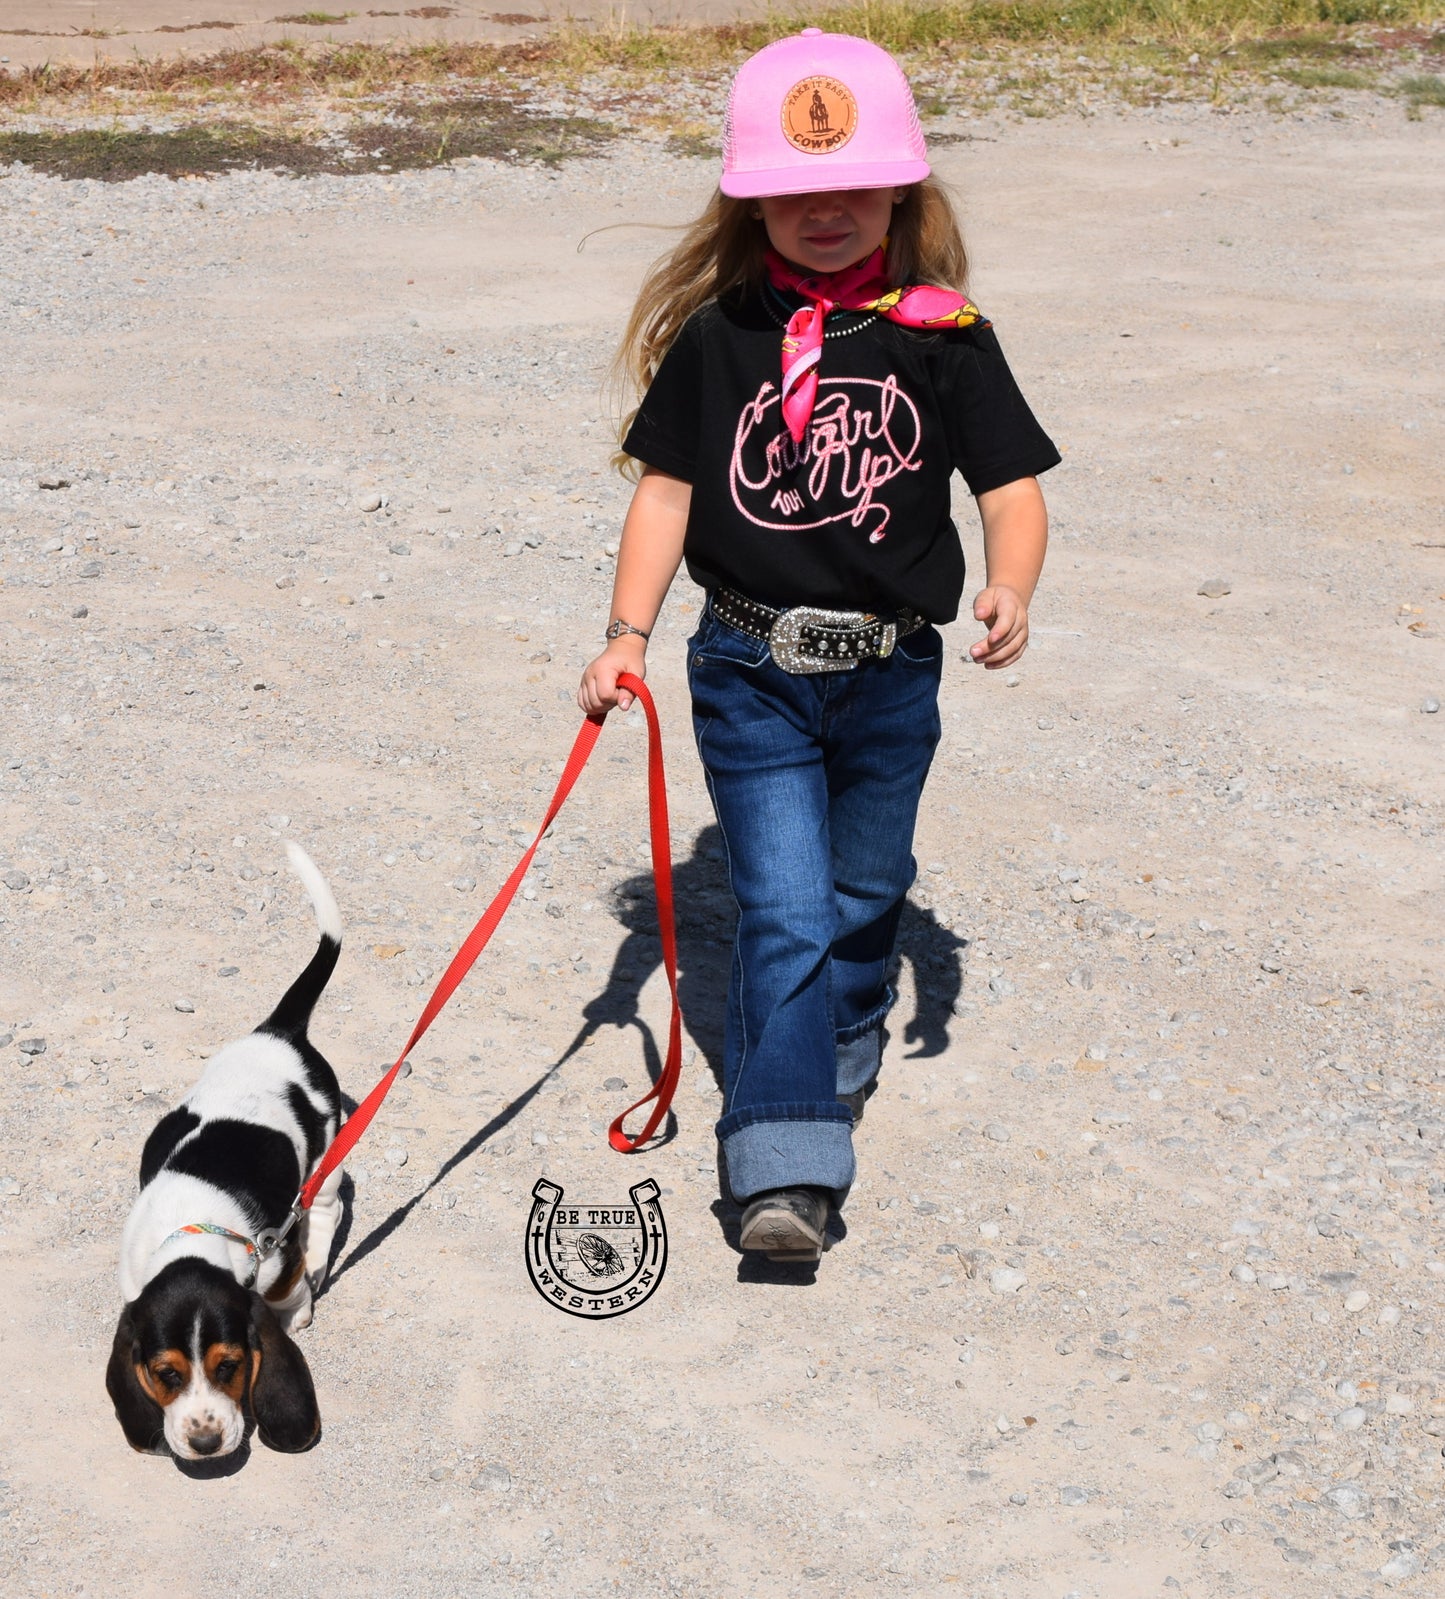 The Cowgirl Up Kids Graphic Tee